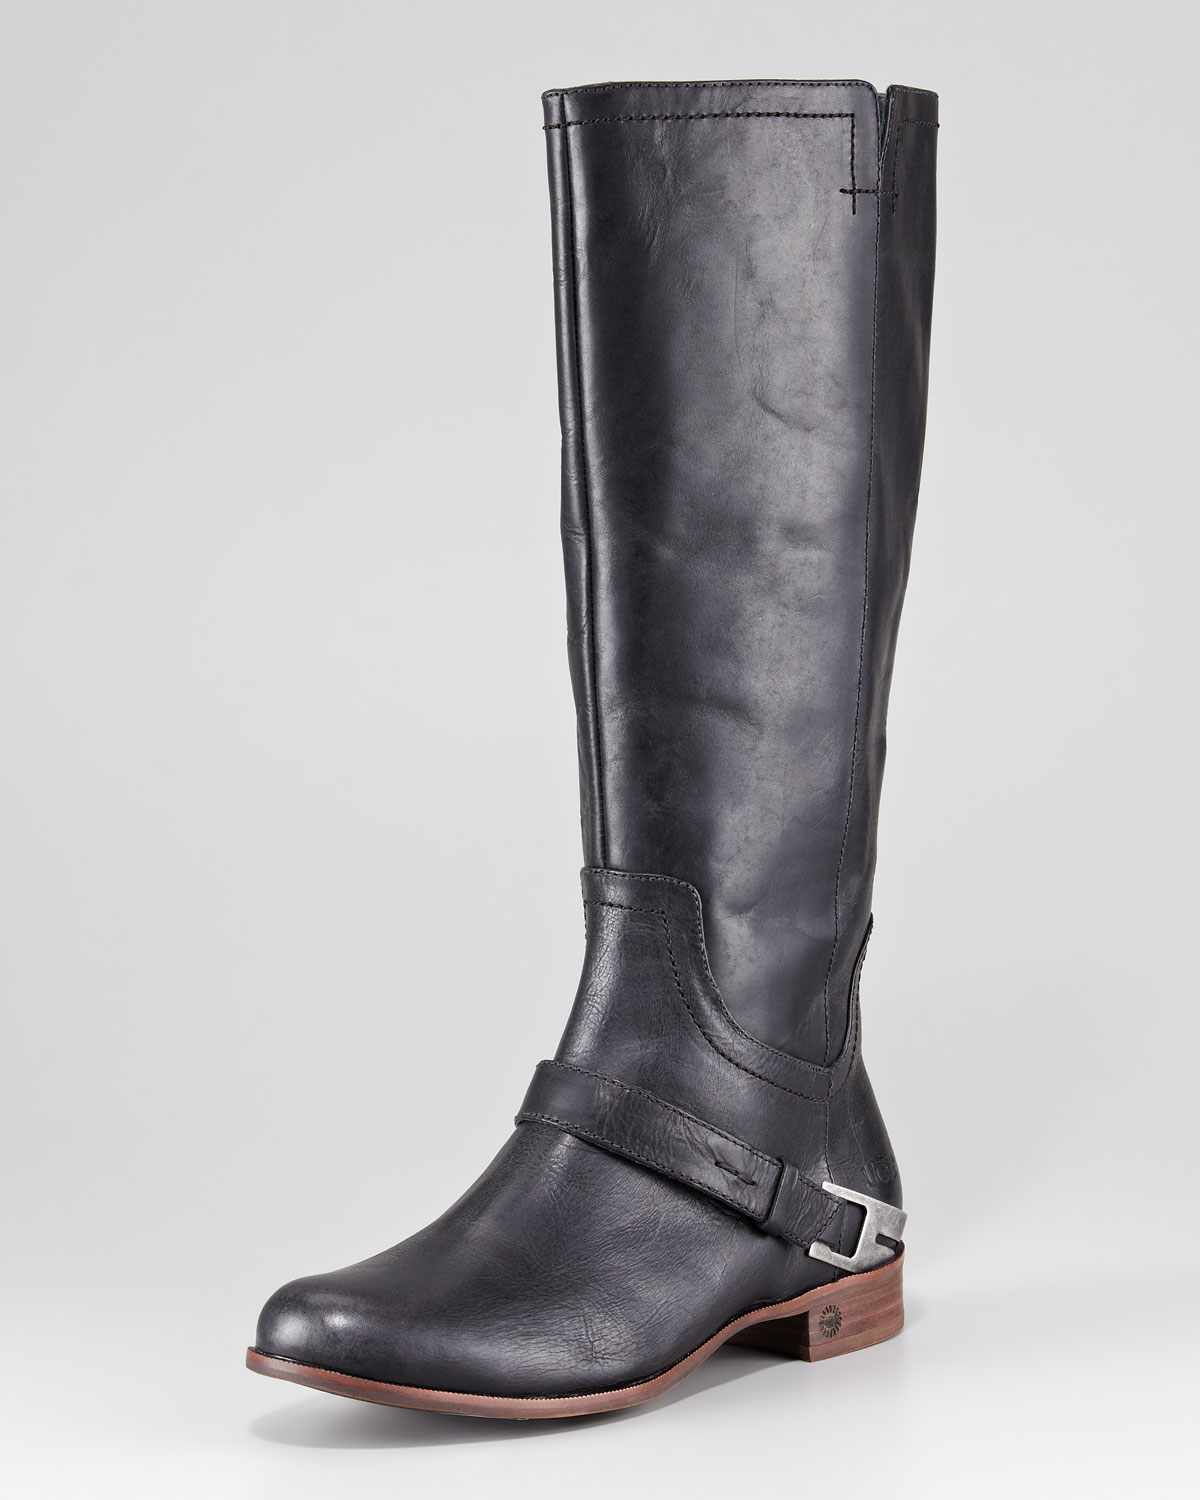 ugg channing leather riding boots 